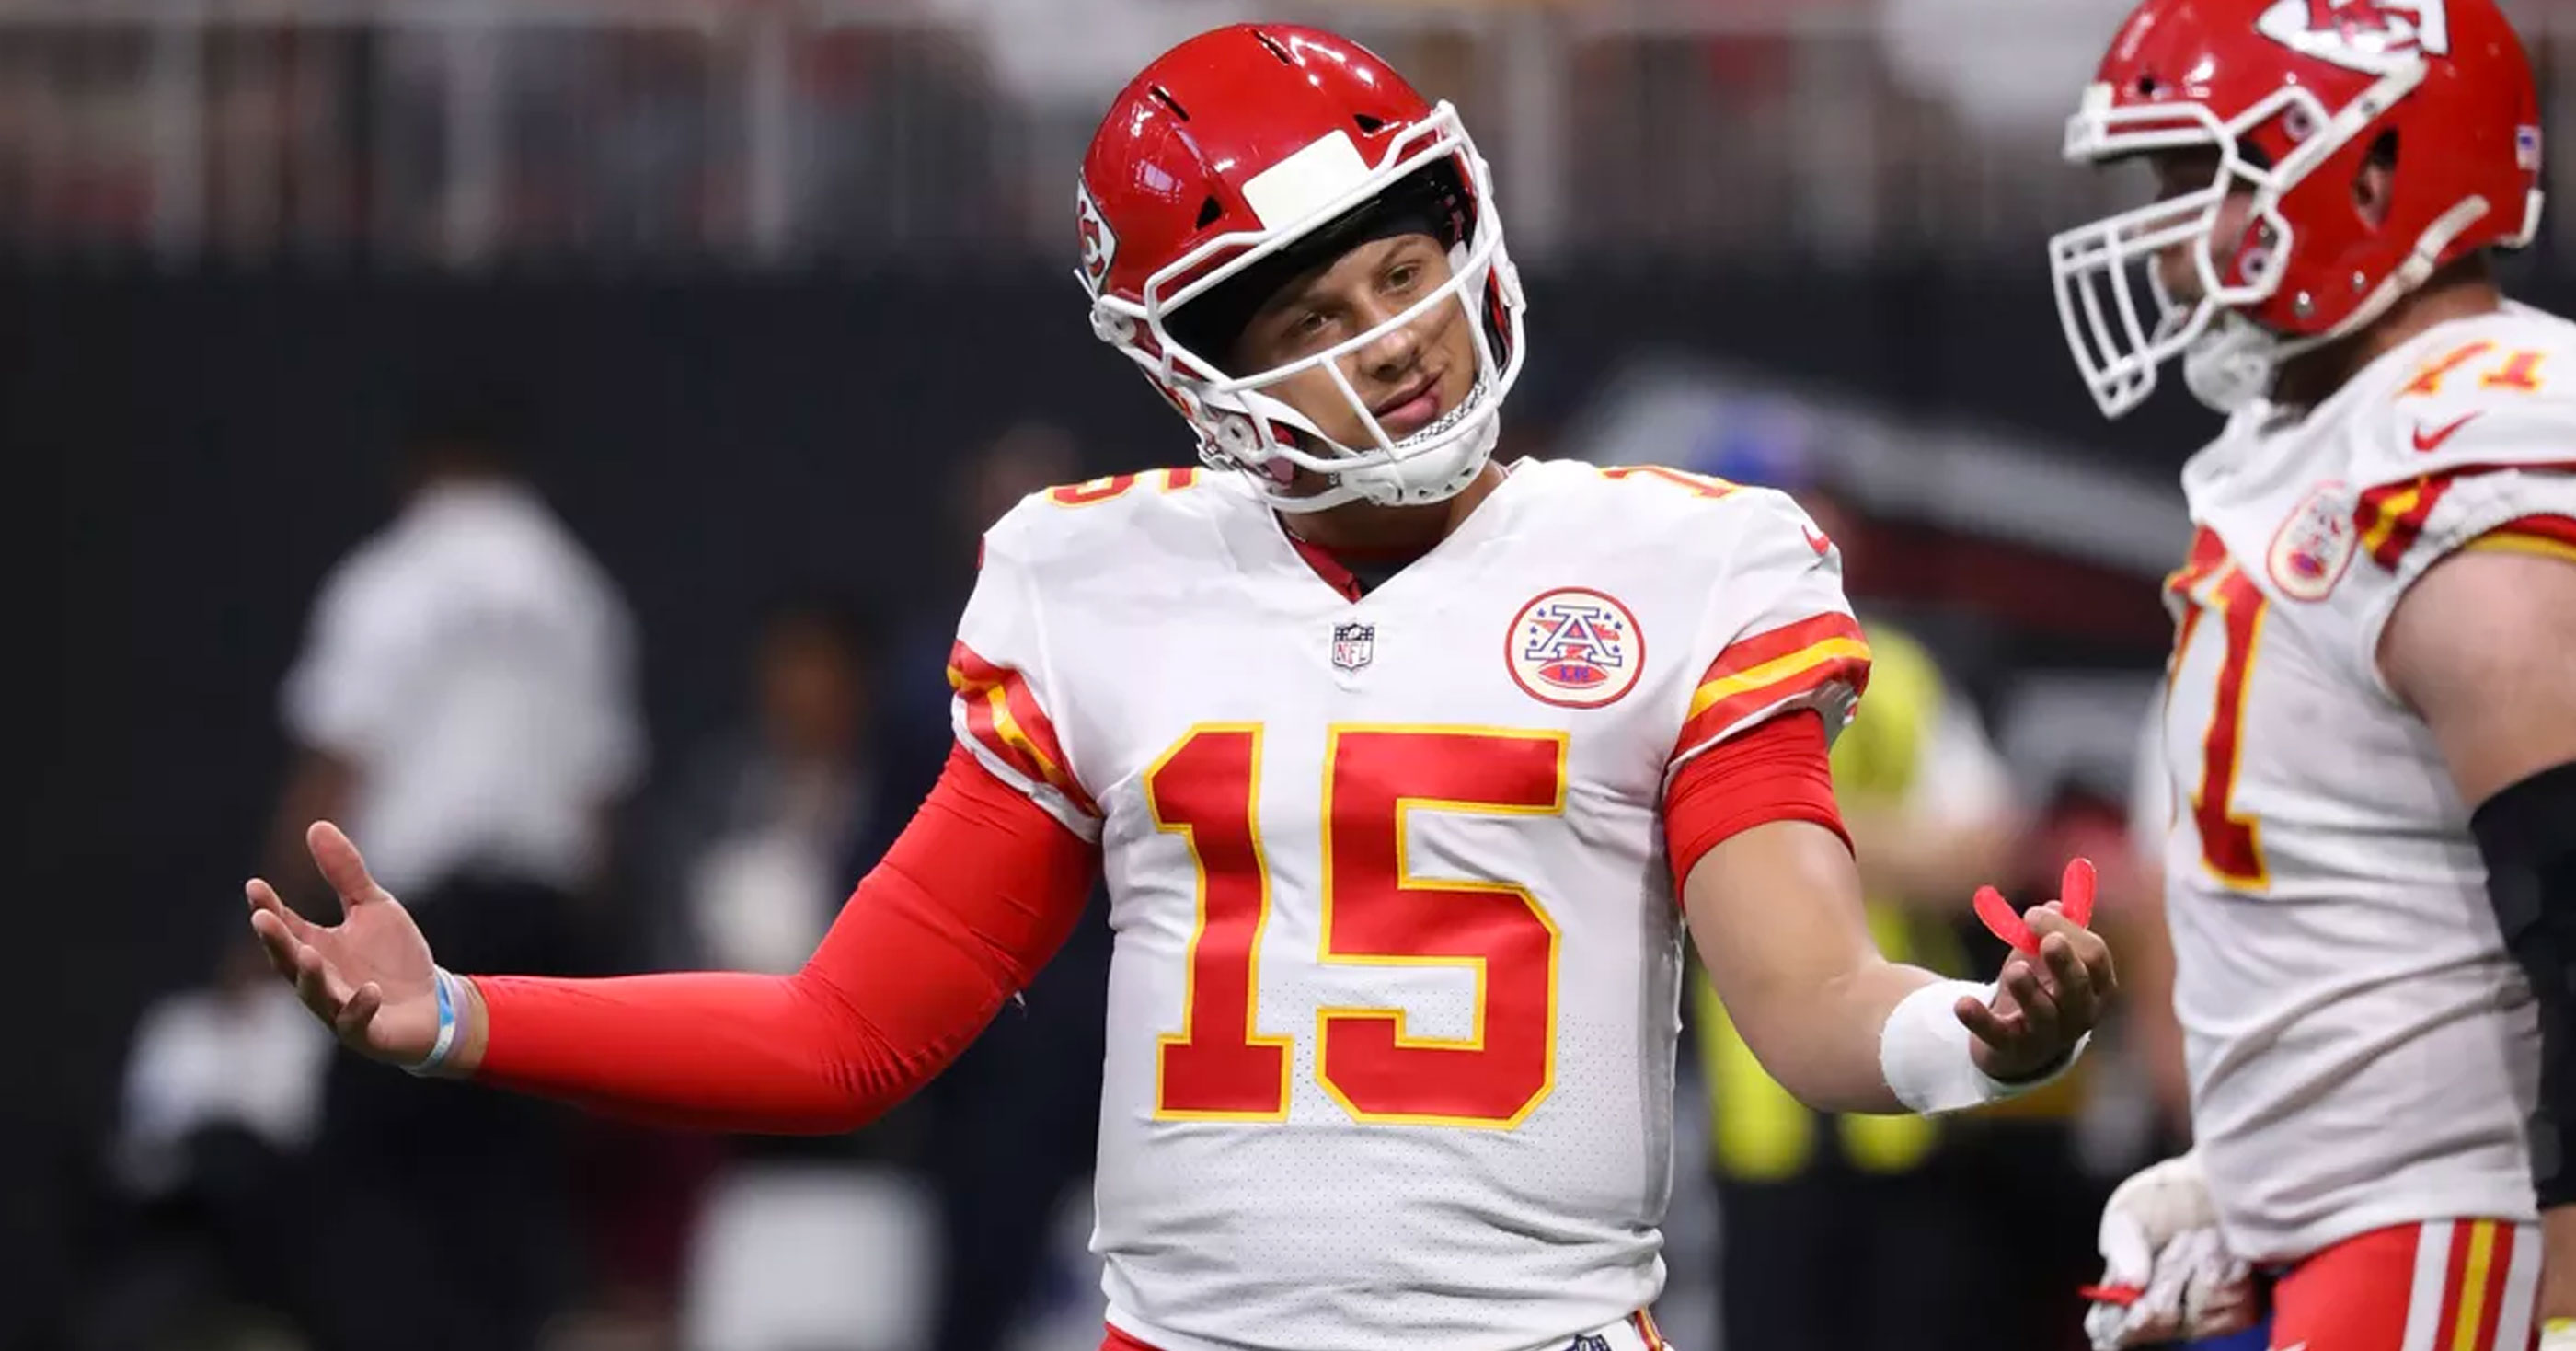 Watch Patrick Mahomes Casually Launch A Ball About 75 Yards With A Flick Of His Wrist